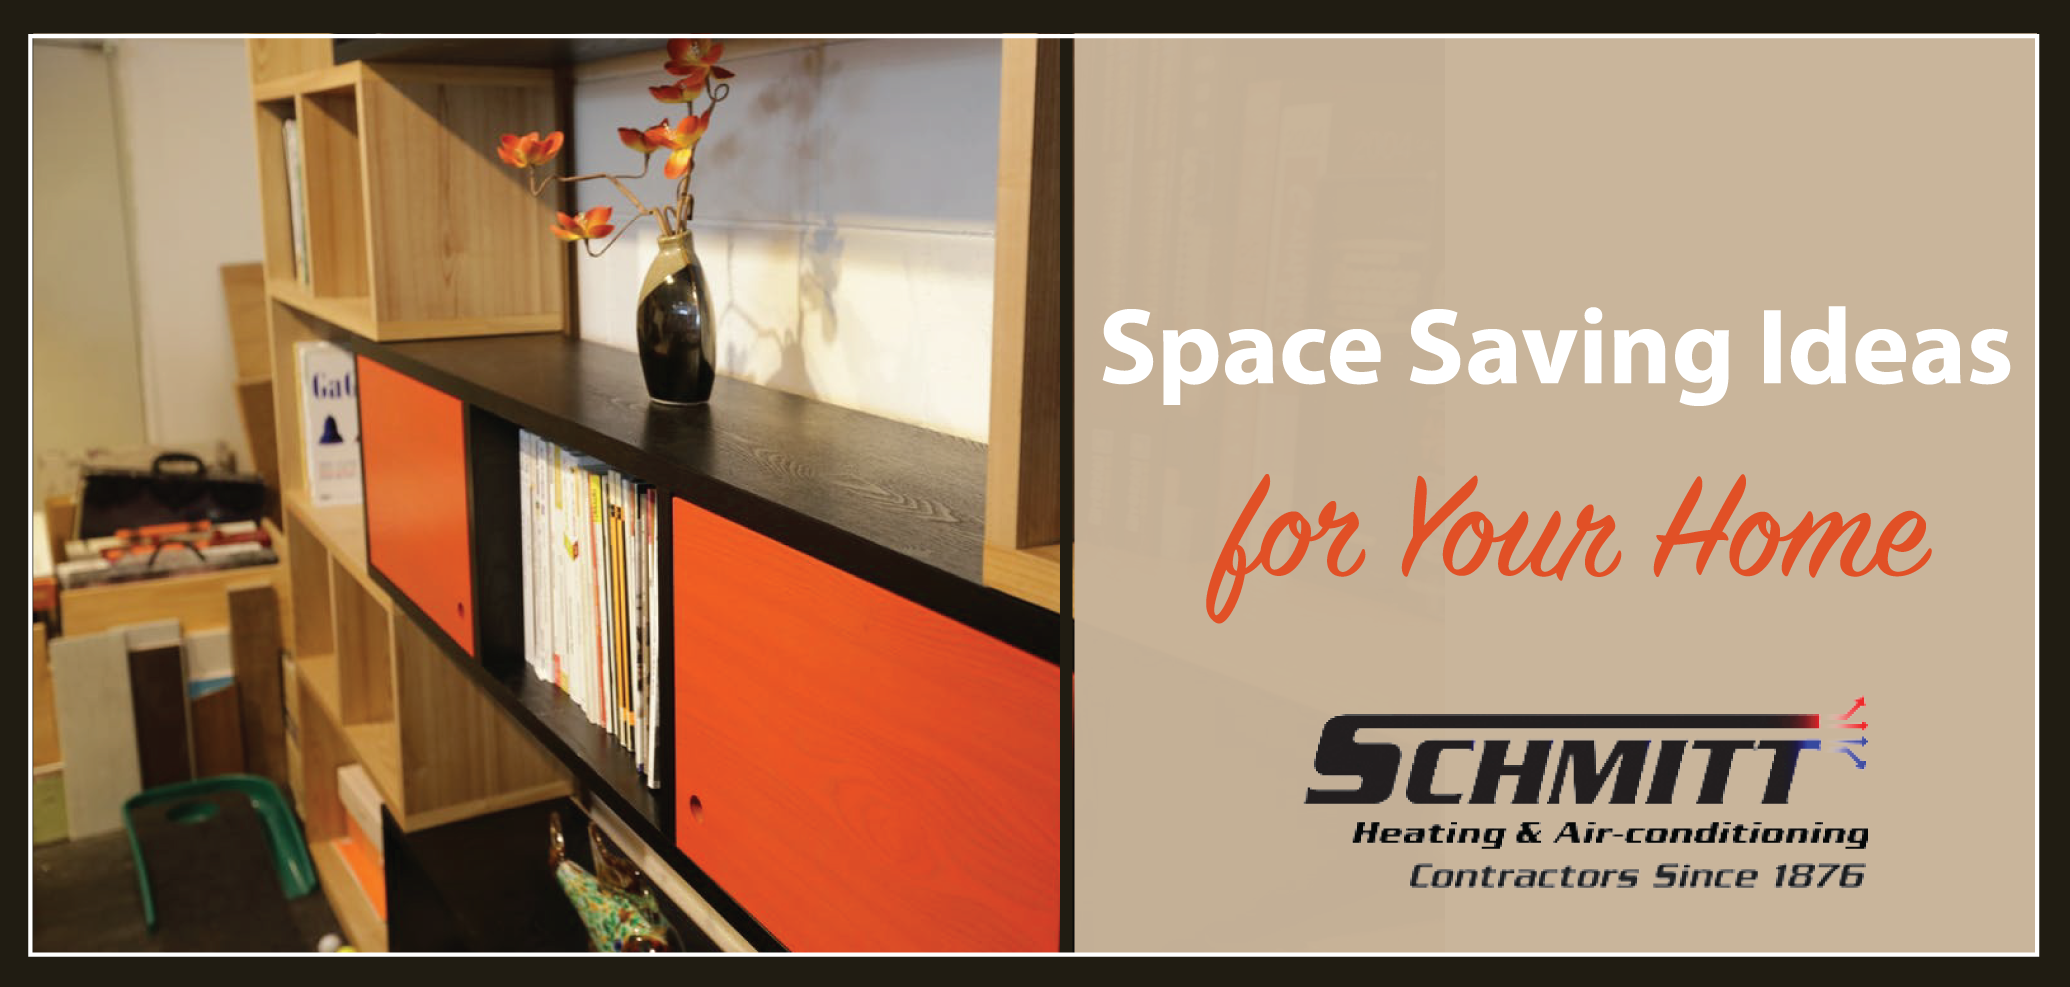 space-saving-tips-for-home-schmitt-heating-and-air-conditioning